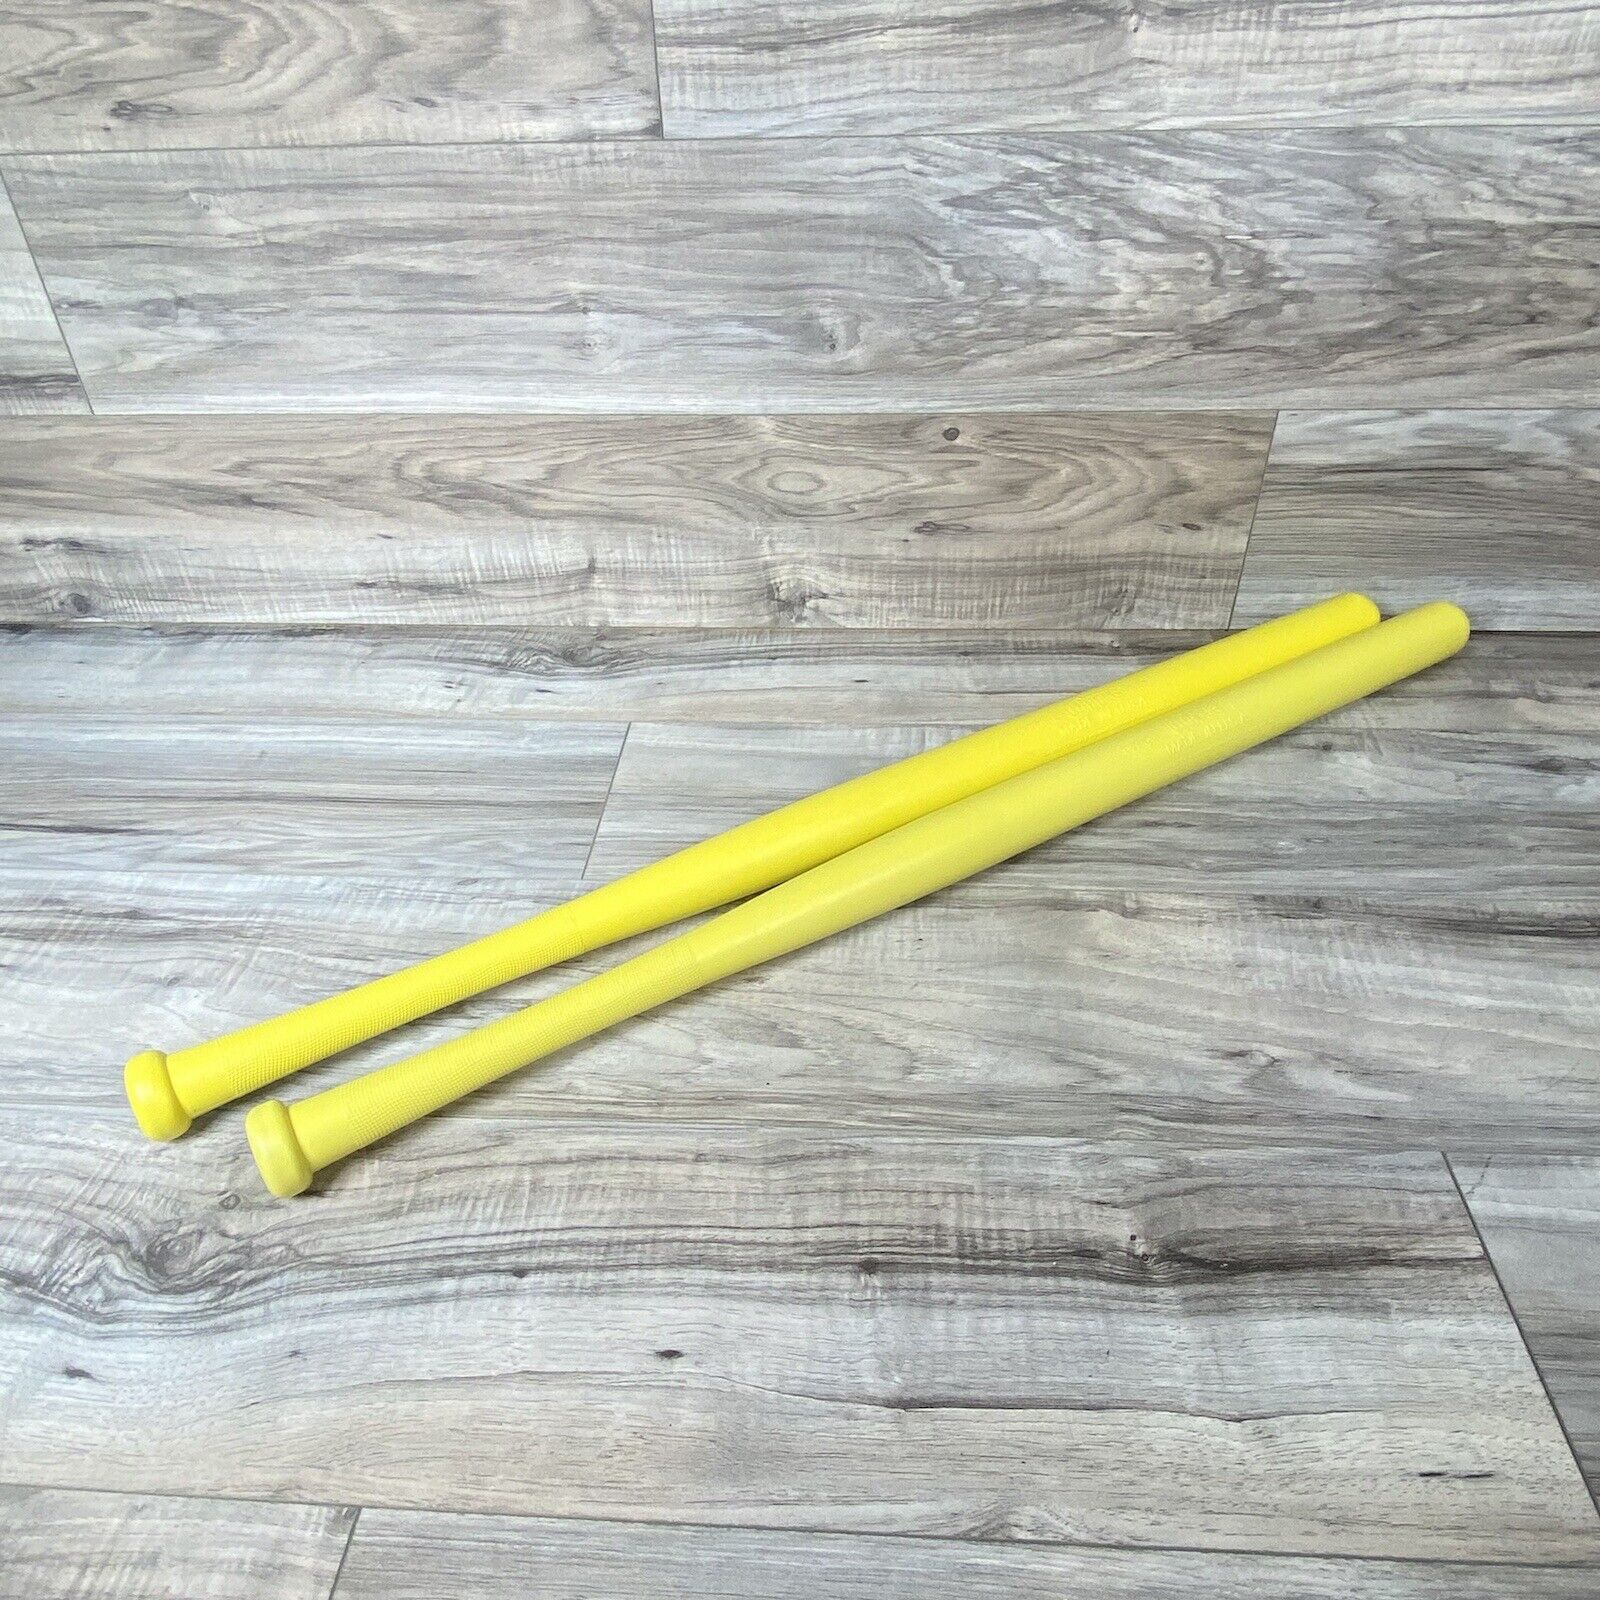 Official Wiffle Ball Bat Vintage Made in USA Yellow Includes 2 Bats